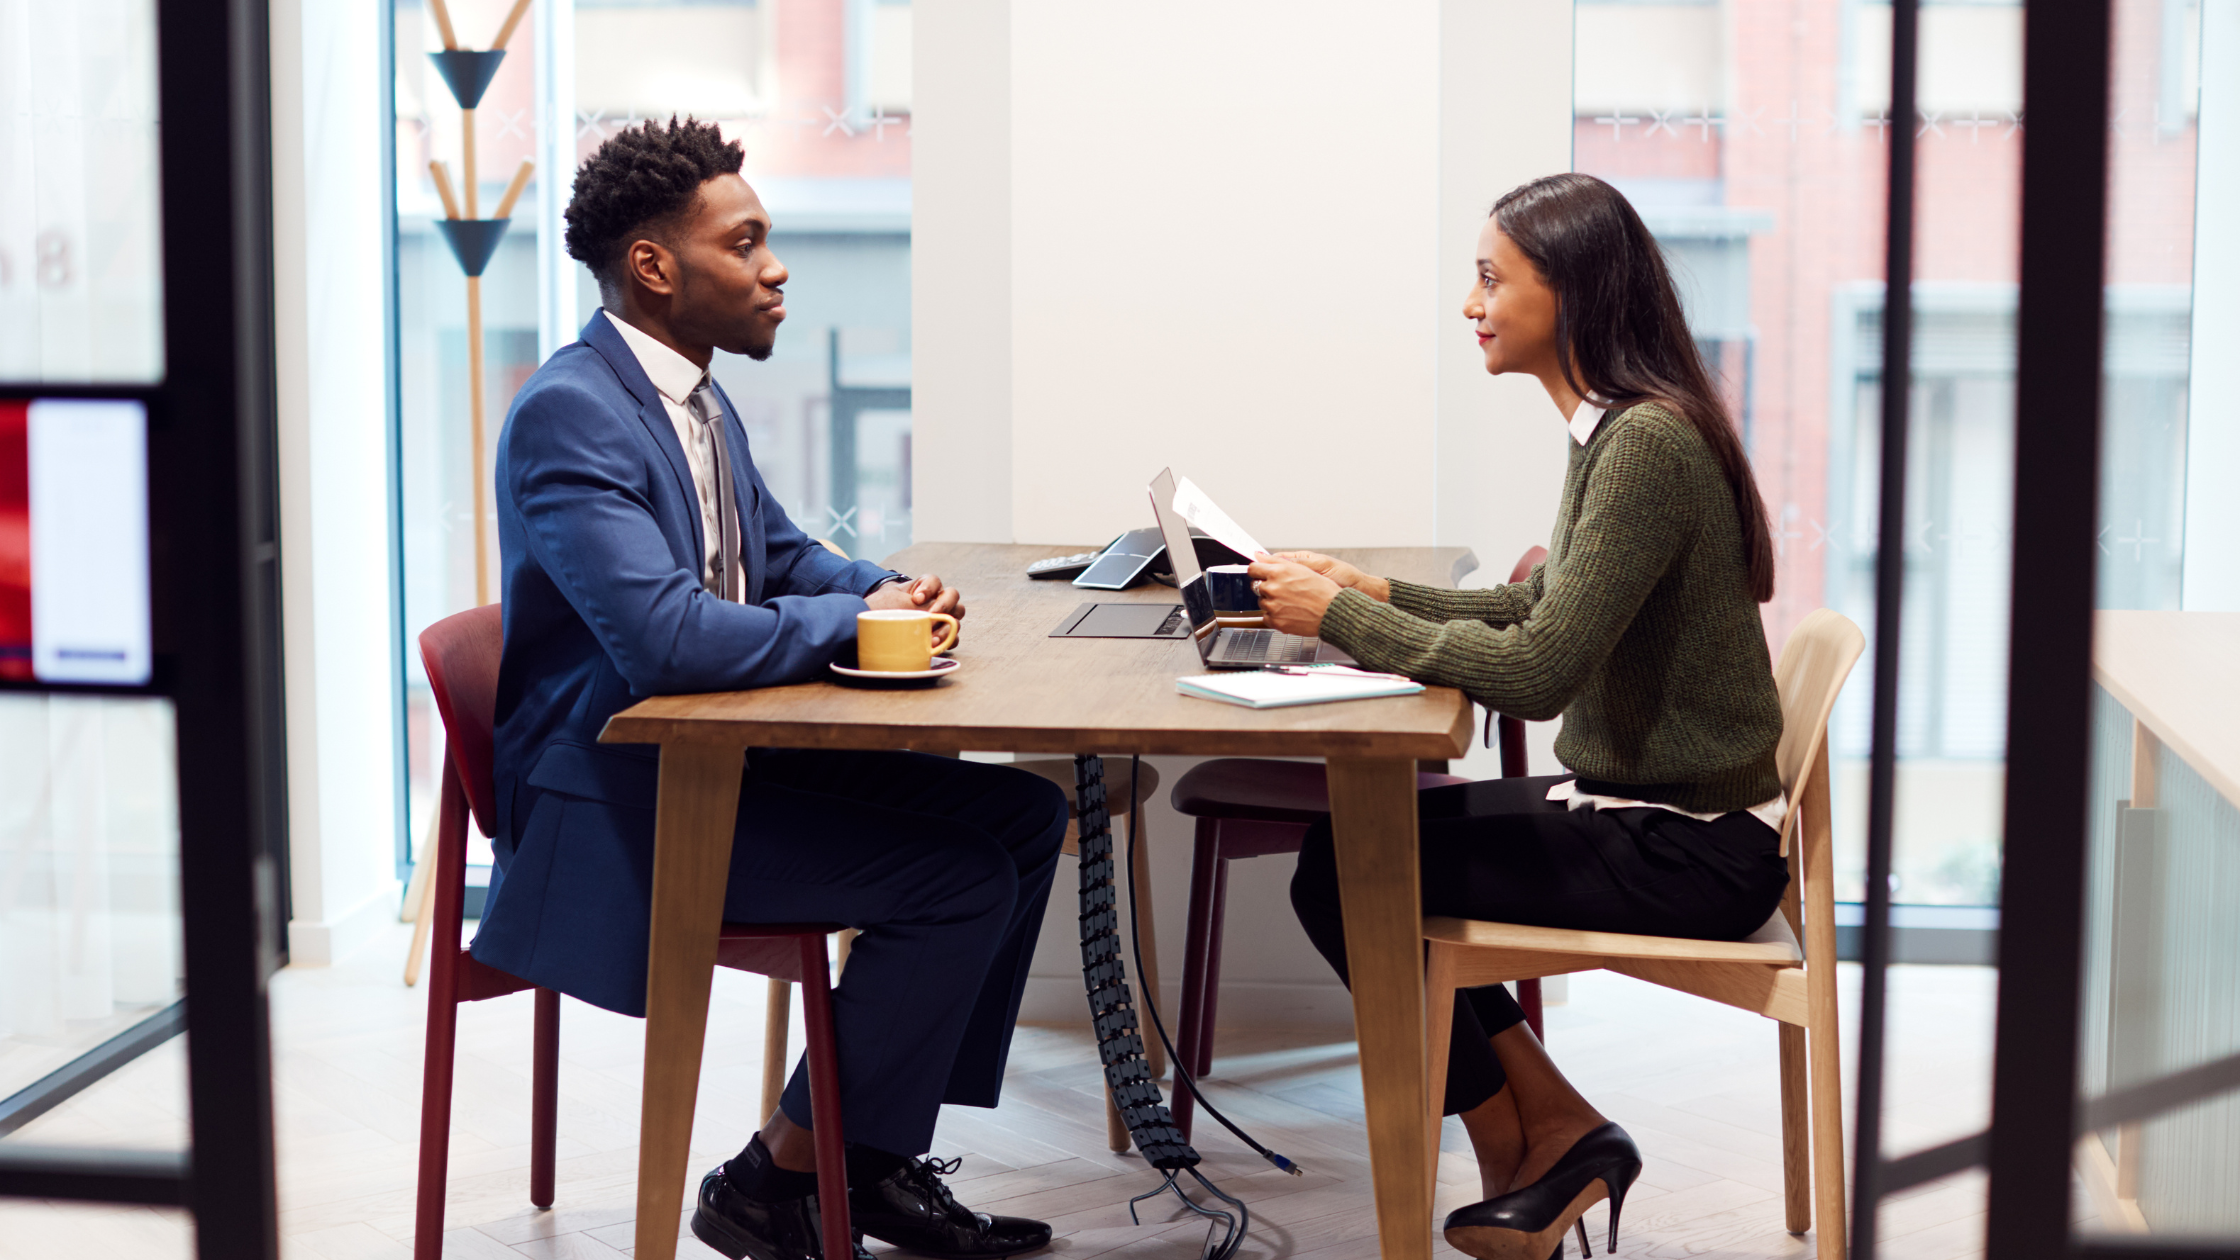 A paralegal intern sits for an interview before an attorney after learning ways to turn his internship into a job offer.